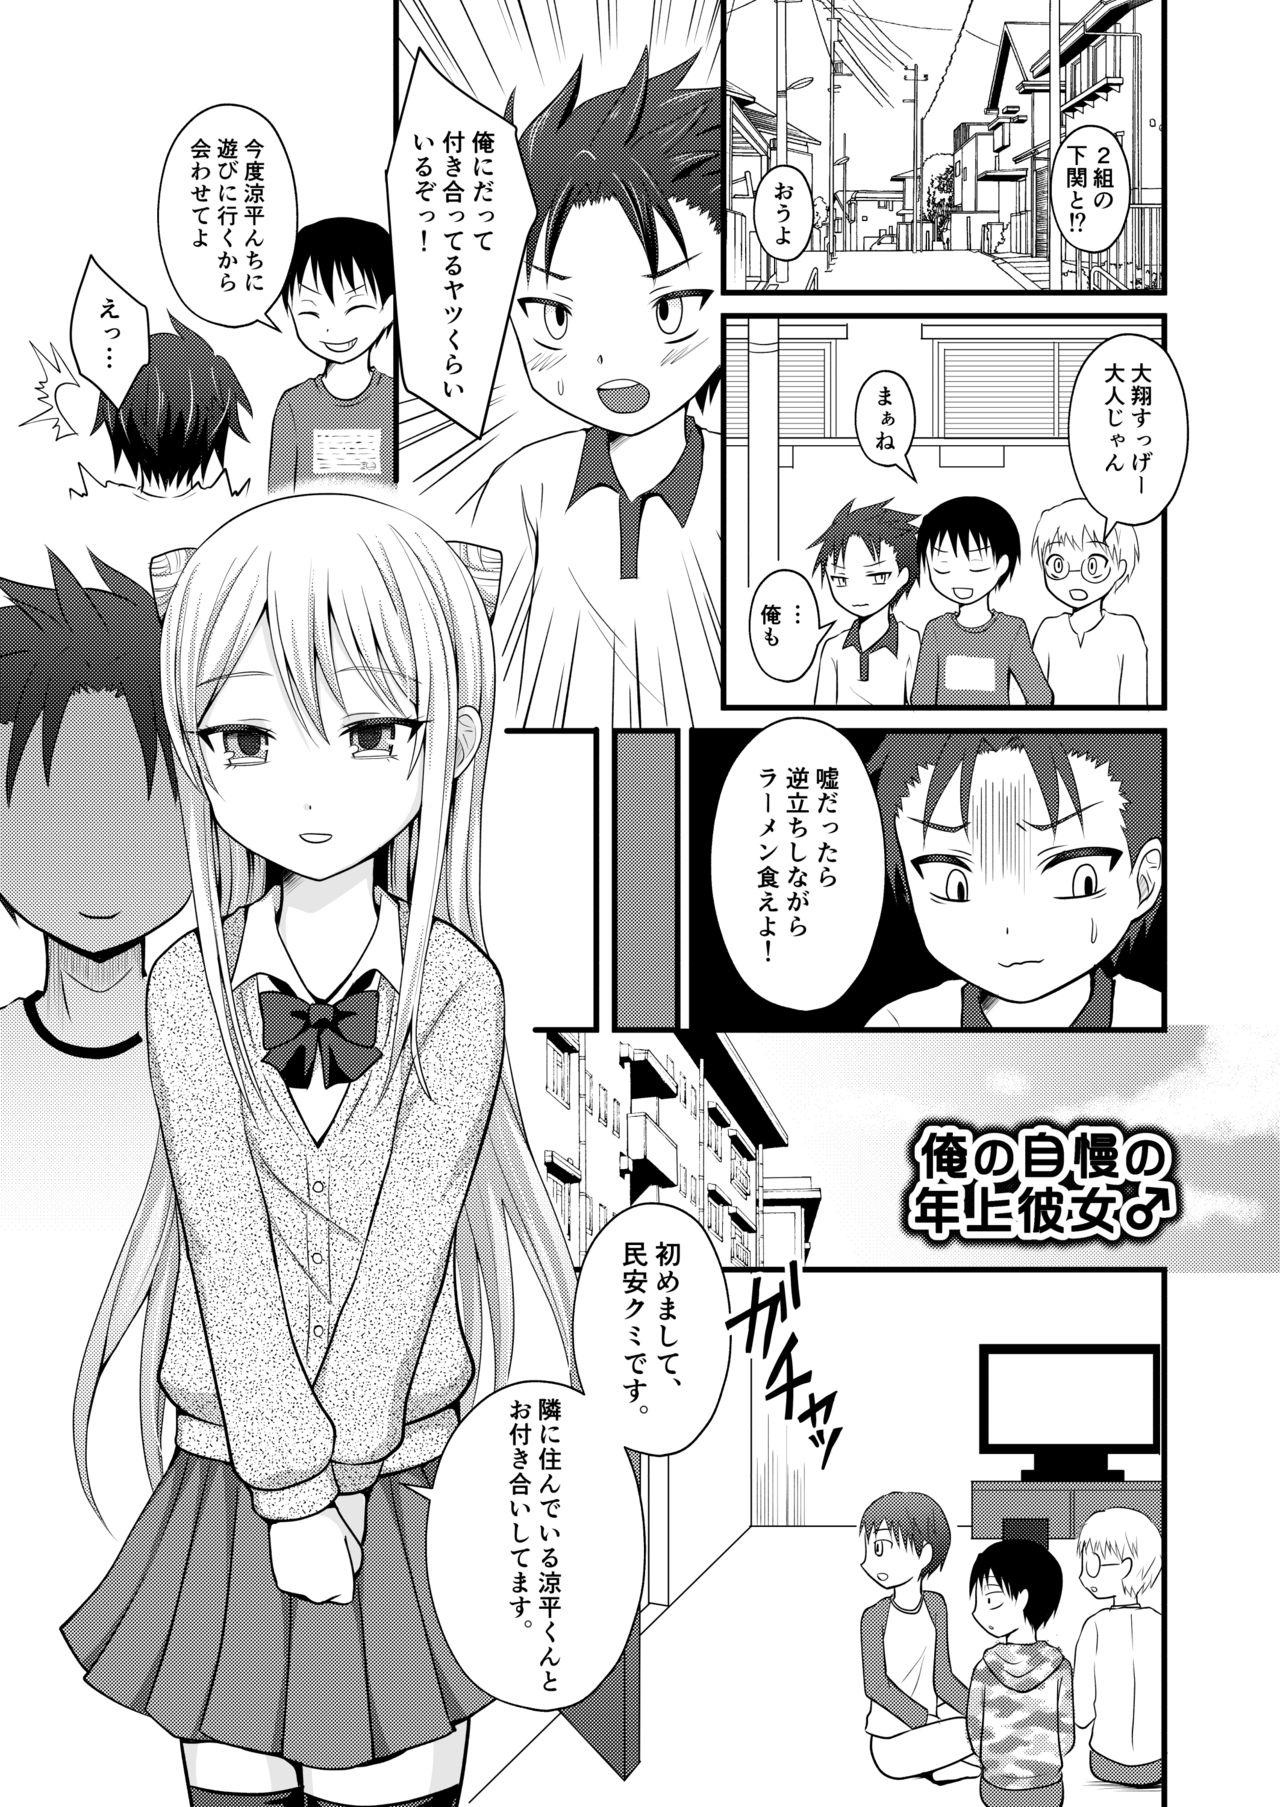 Amateur Ore no Jiman no Toshiue Kanojo - Original Old And Young - Page 3